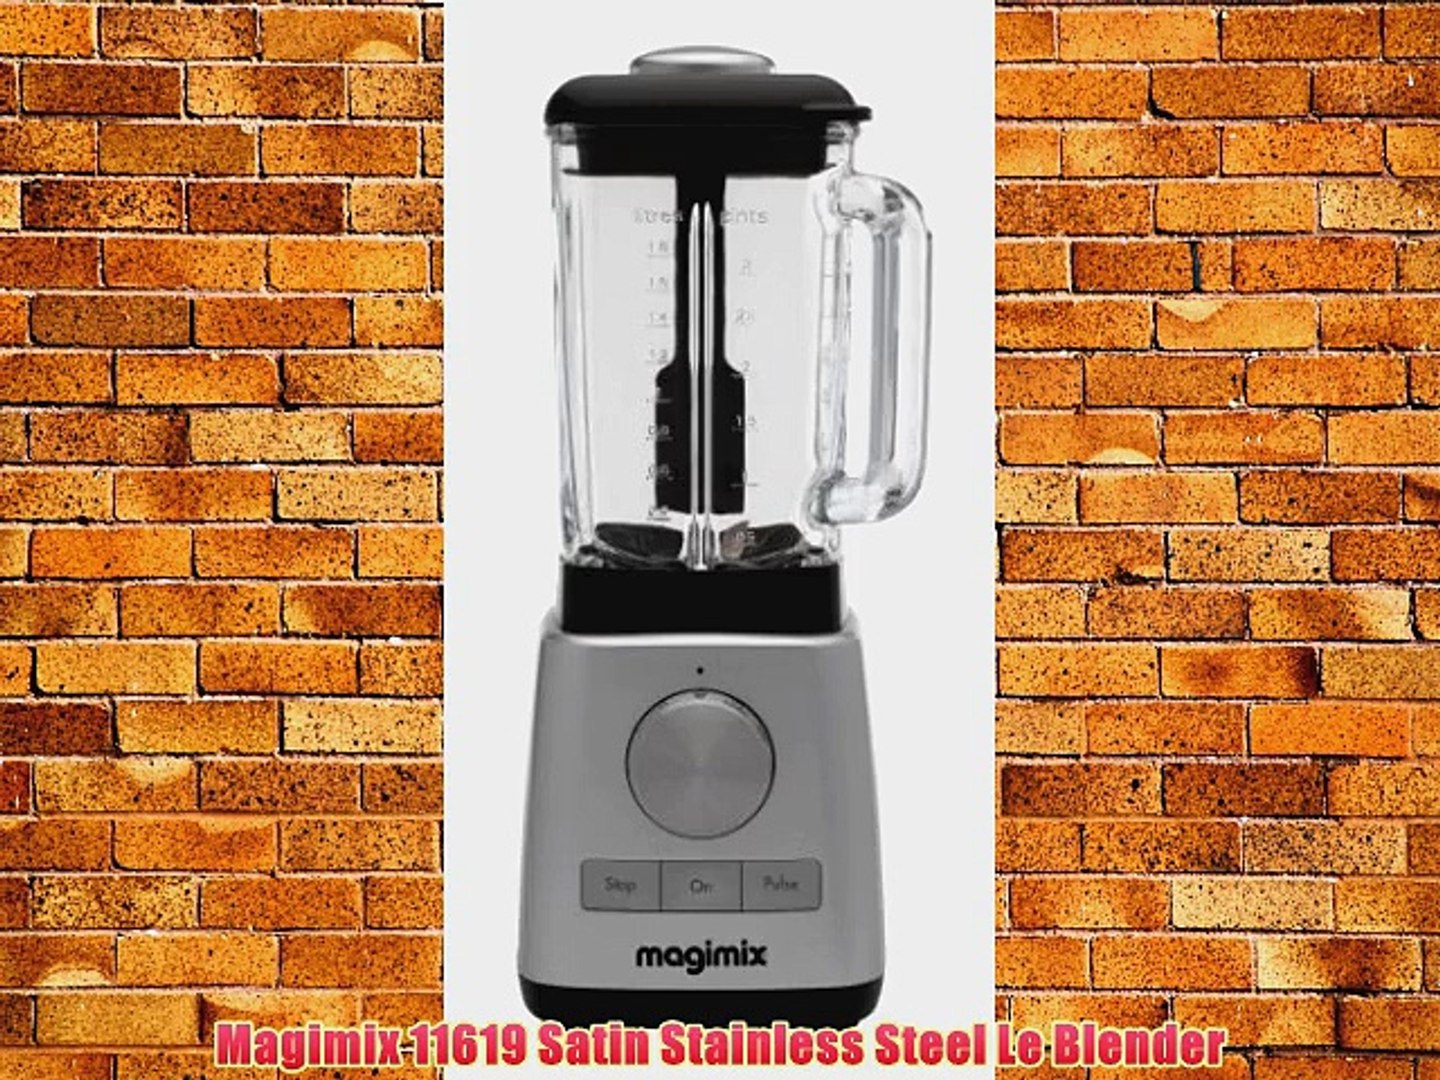 Magimix 11619 Satin Stainless Steel Le Blender - video Dailymotion